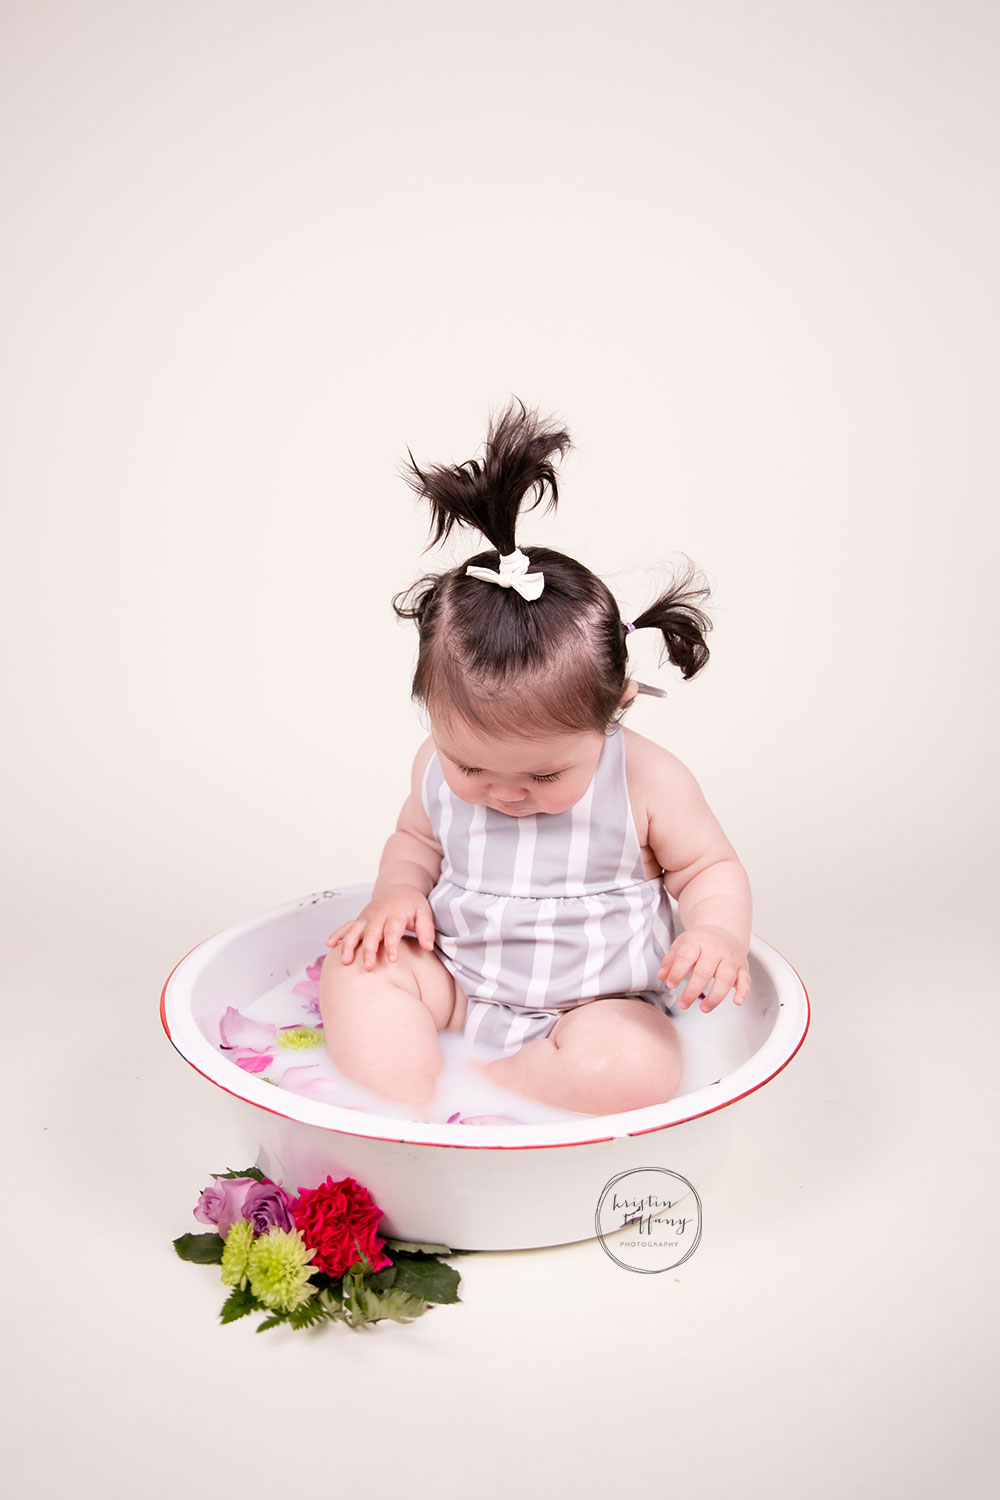 a photo of a baby girl at her cake smash photo session